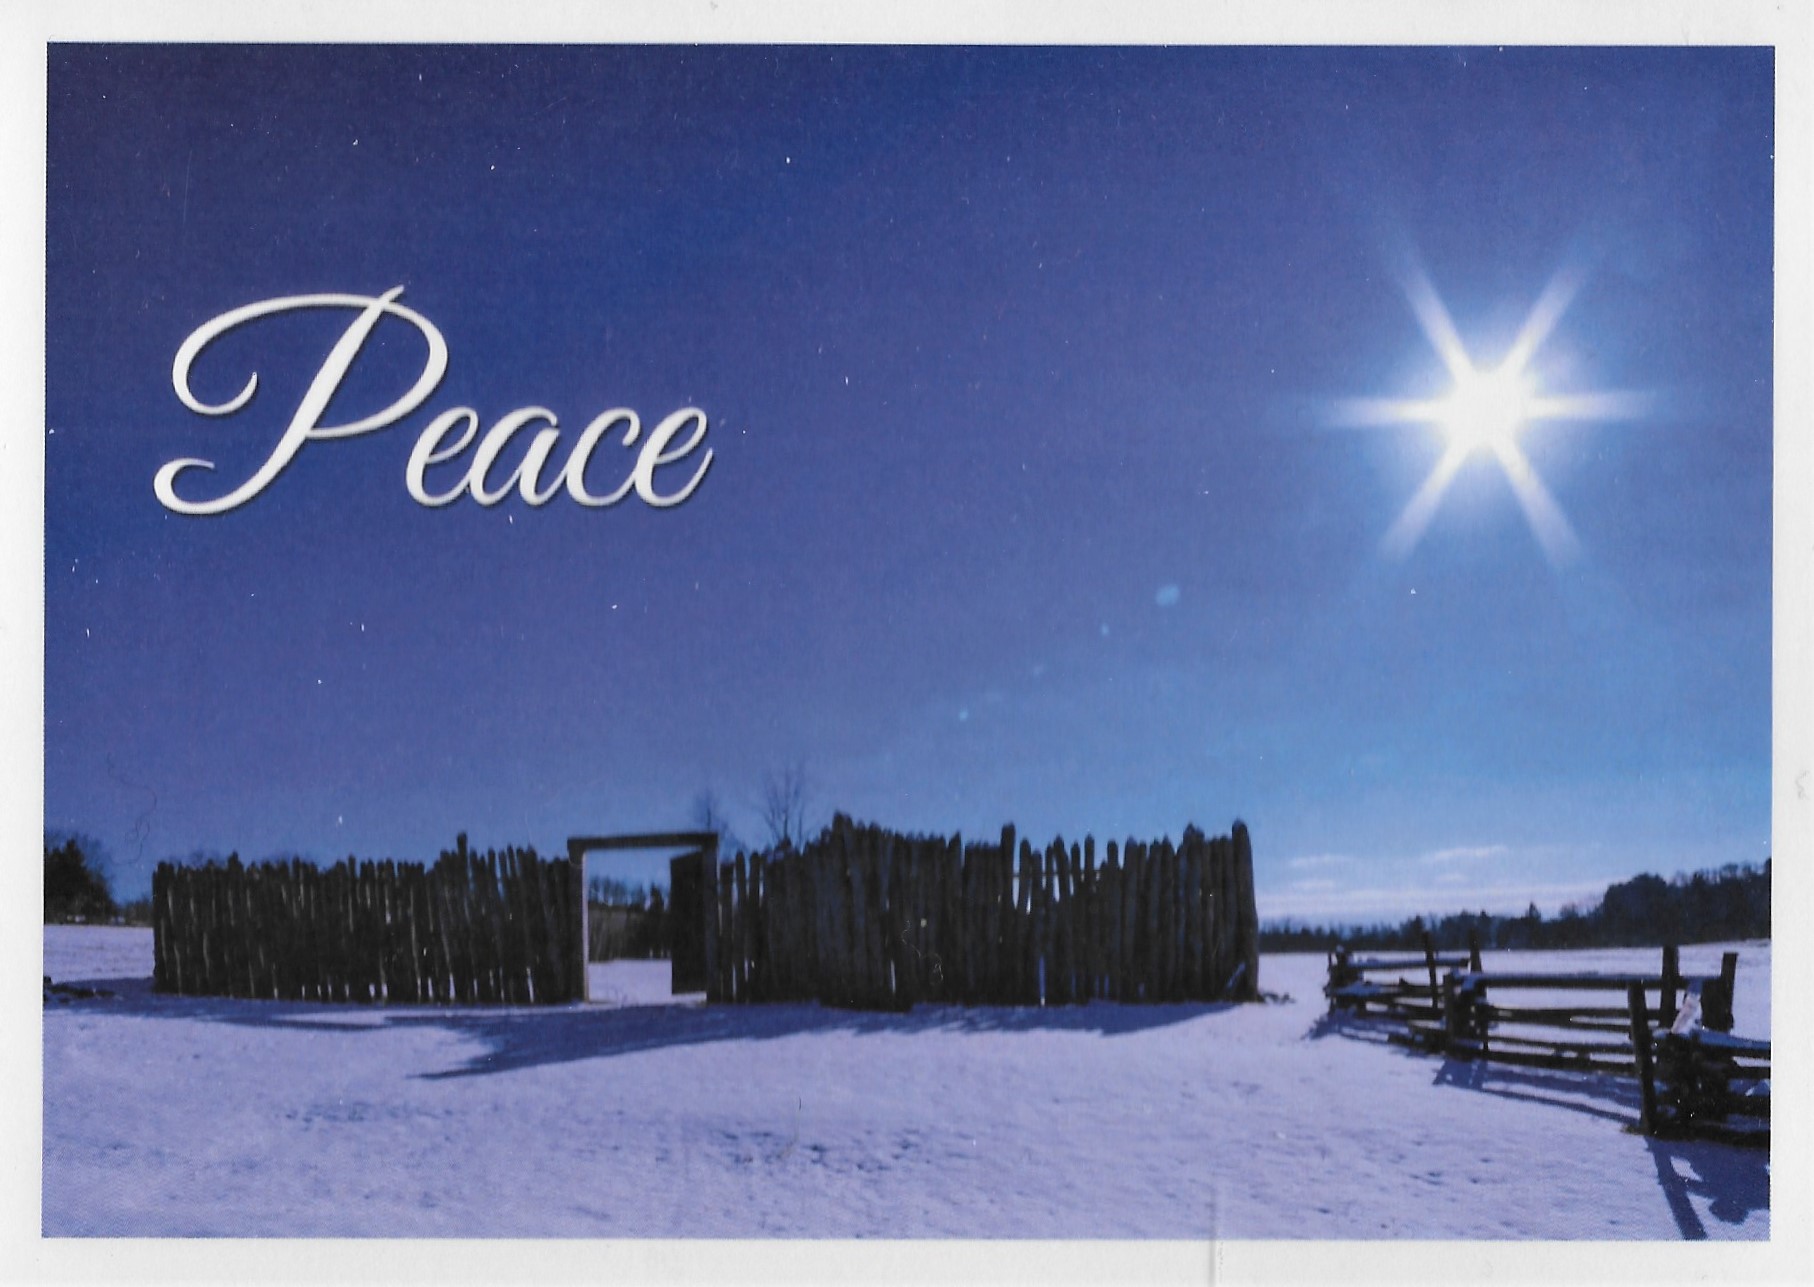 boxed-peace-cards-westmoreland-county-historical-society